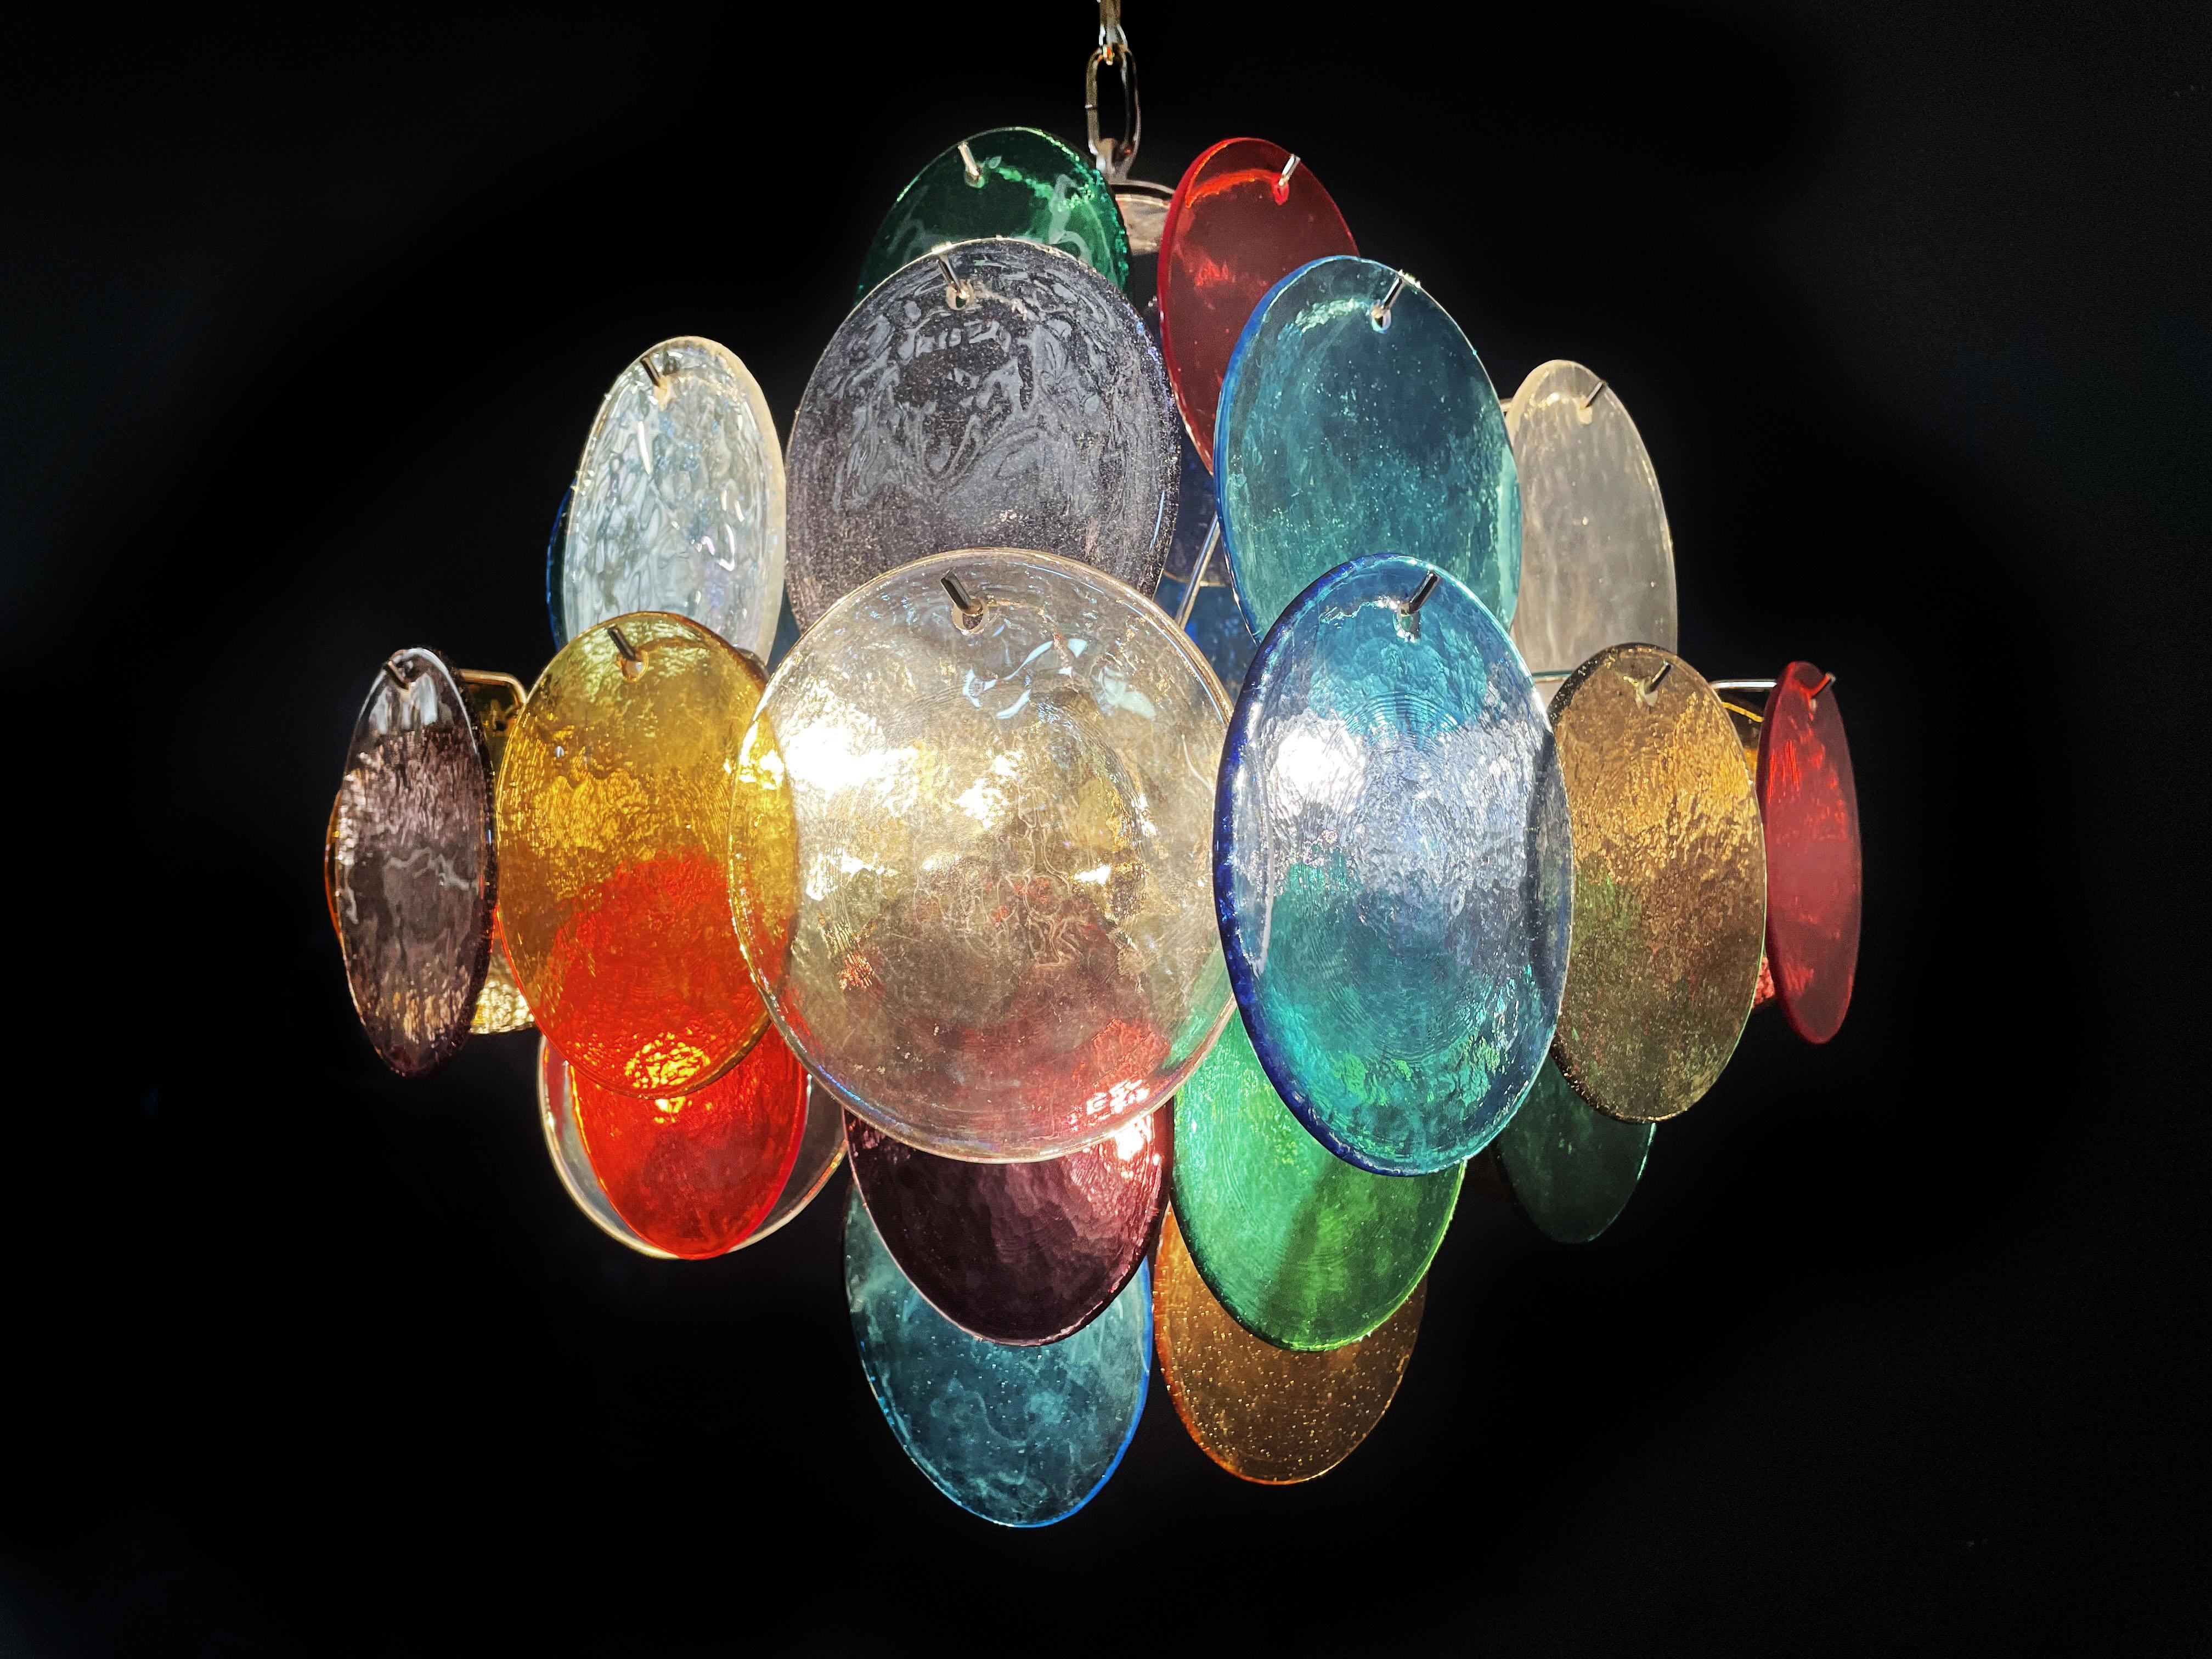 Metal Pair Charming Mid-Century Arlecchino Italian Disc Chandeliers, Murano, 1990s For Sale